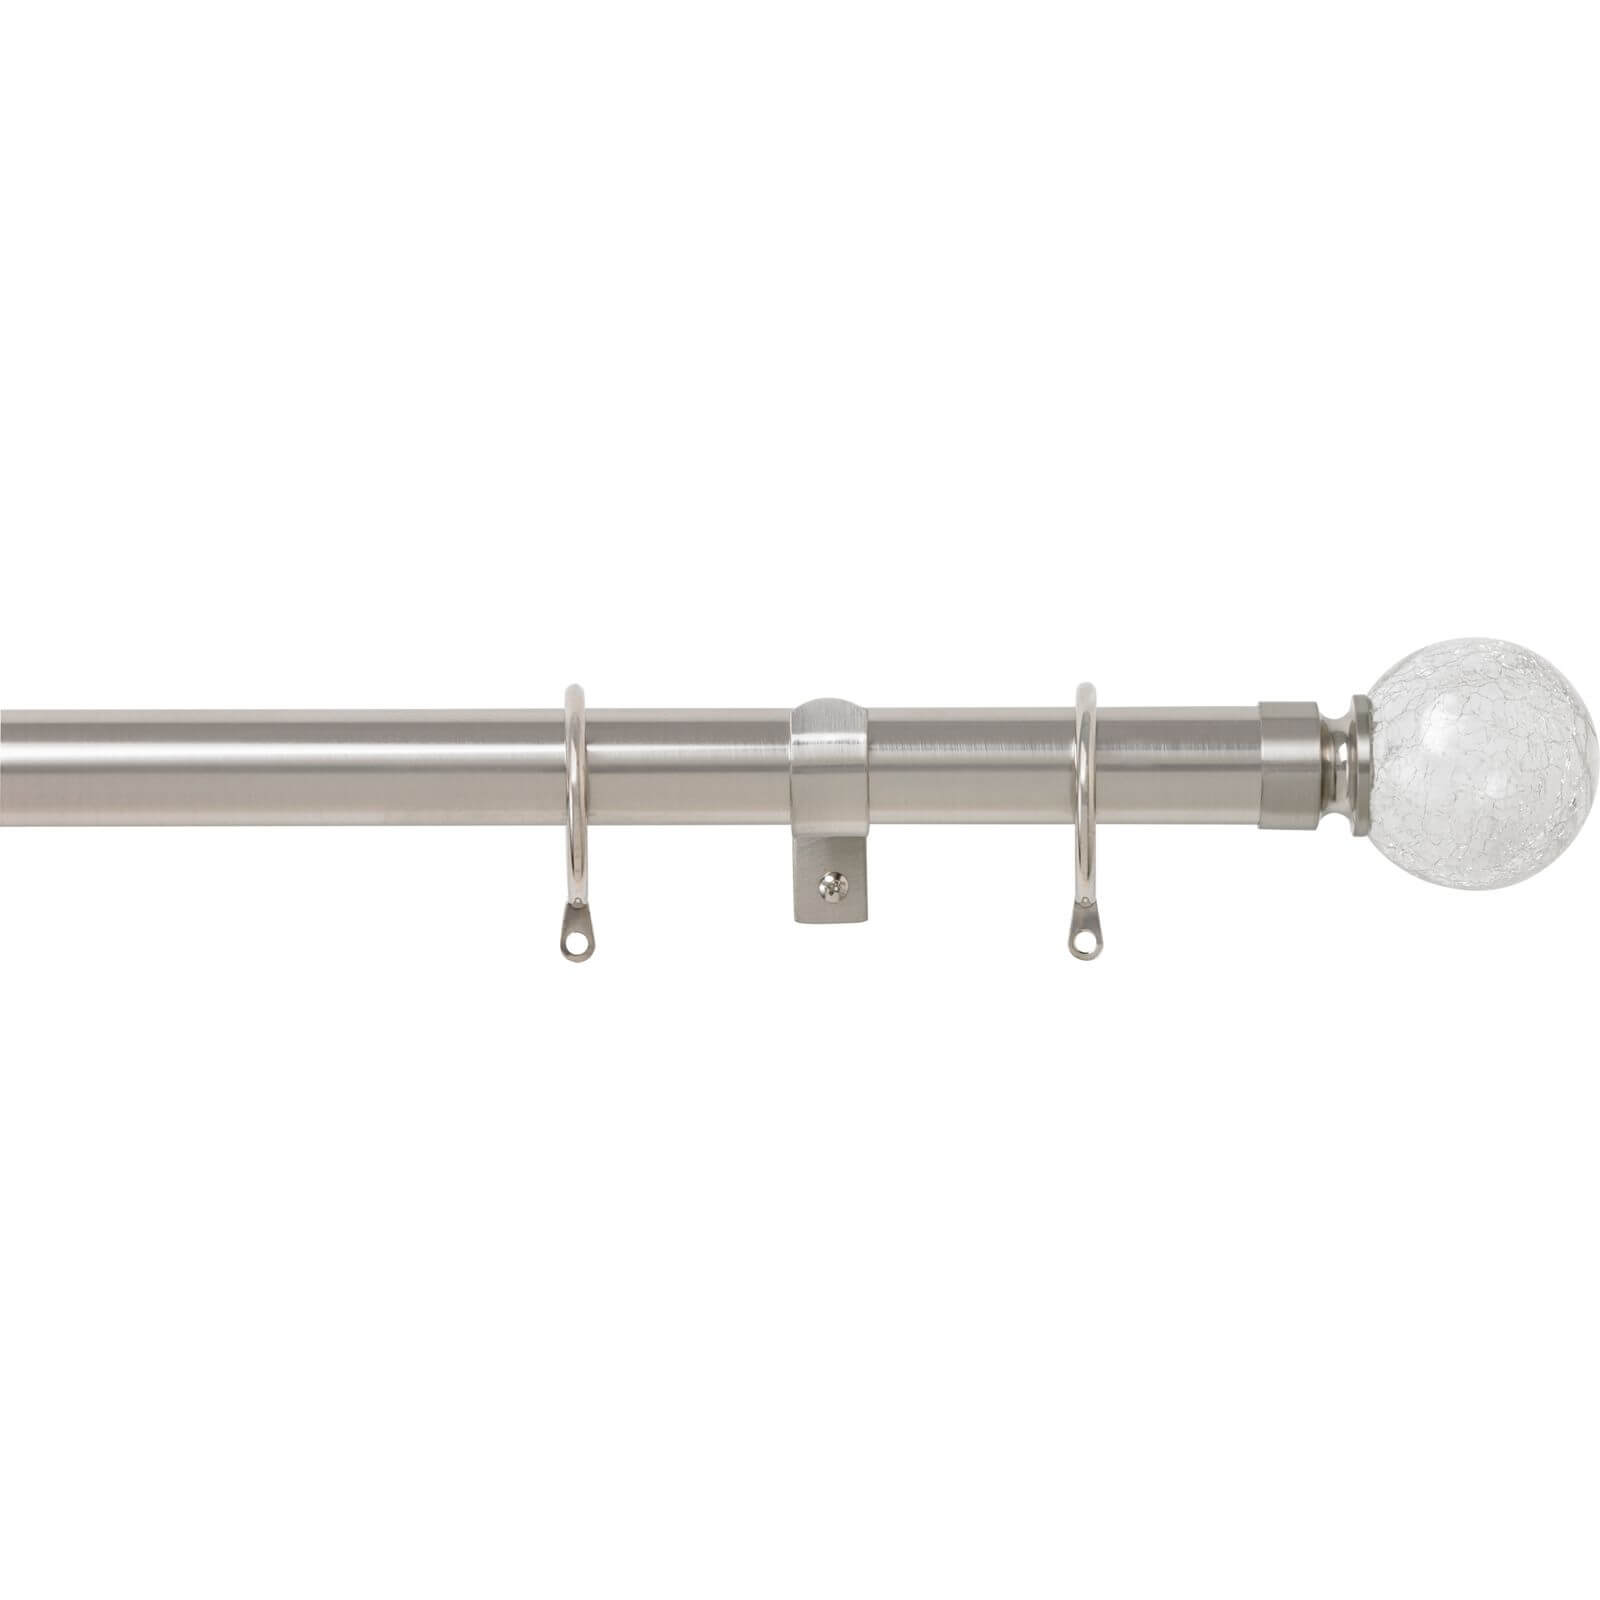 Satin Steel 28mm Fixed Curtain Pole Crackle 1.8m